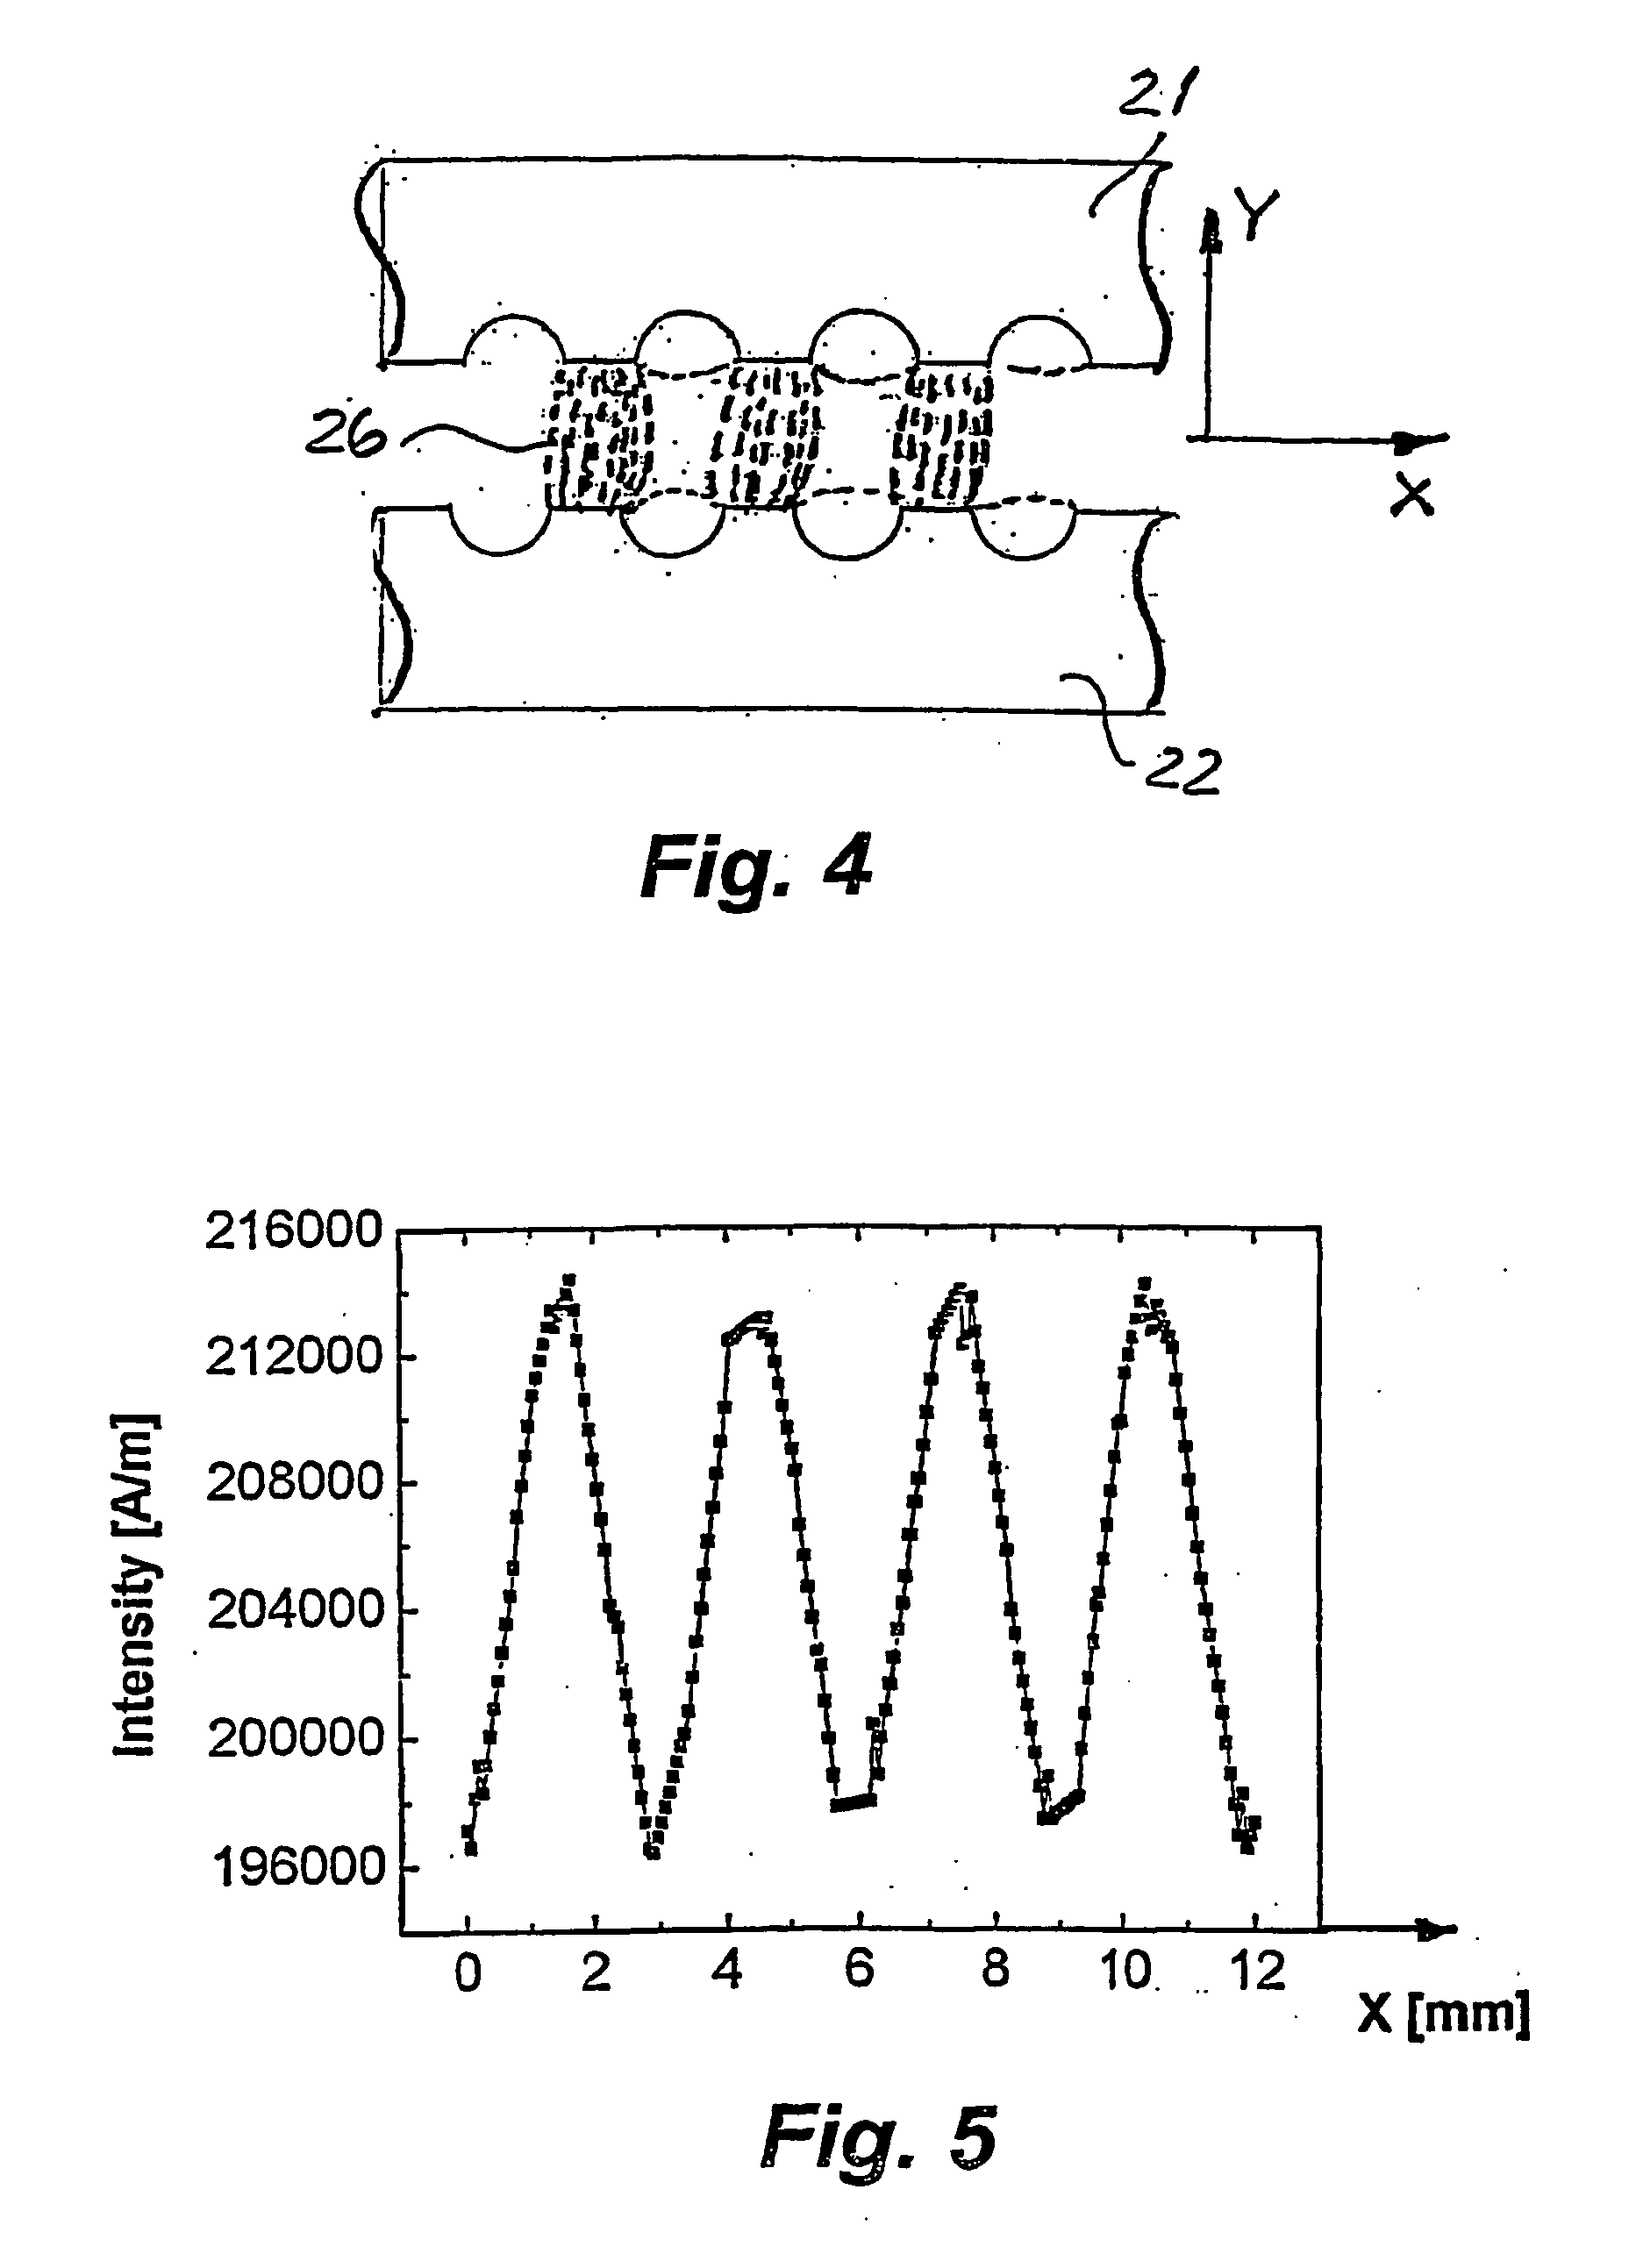 Apparatus for retaining magnetic particles within a flow-through cell